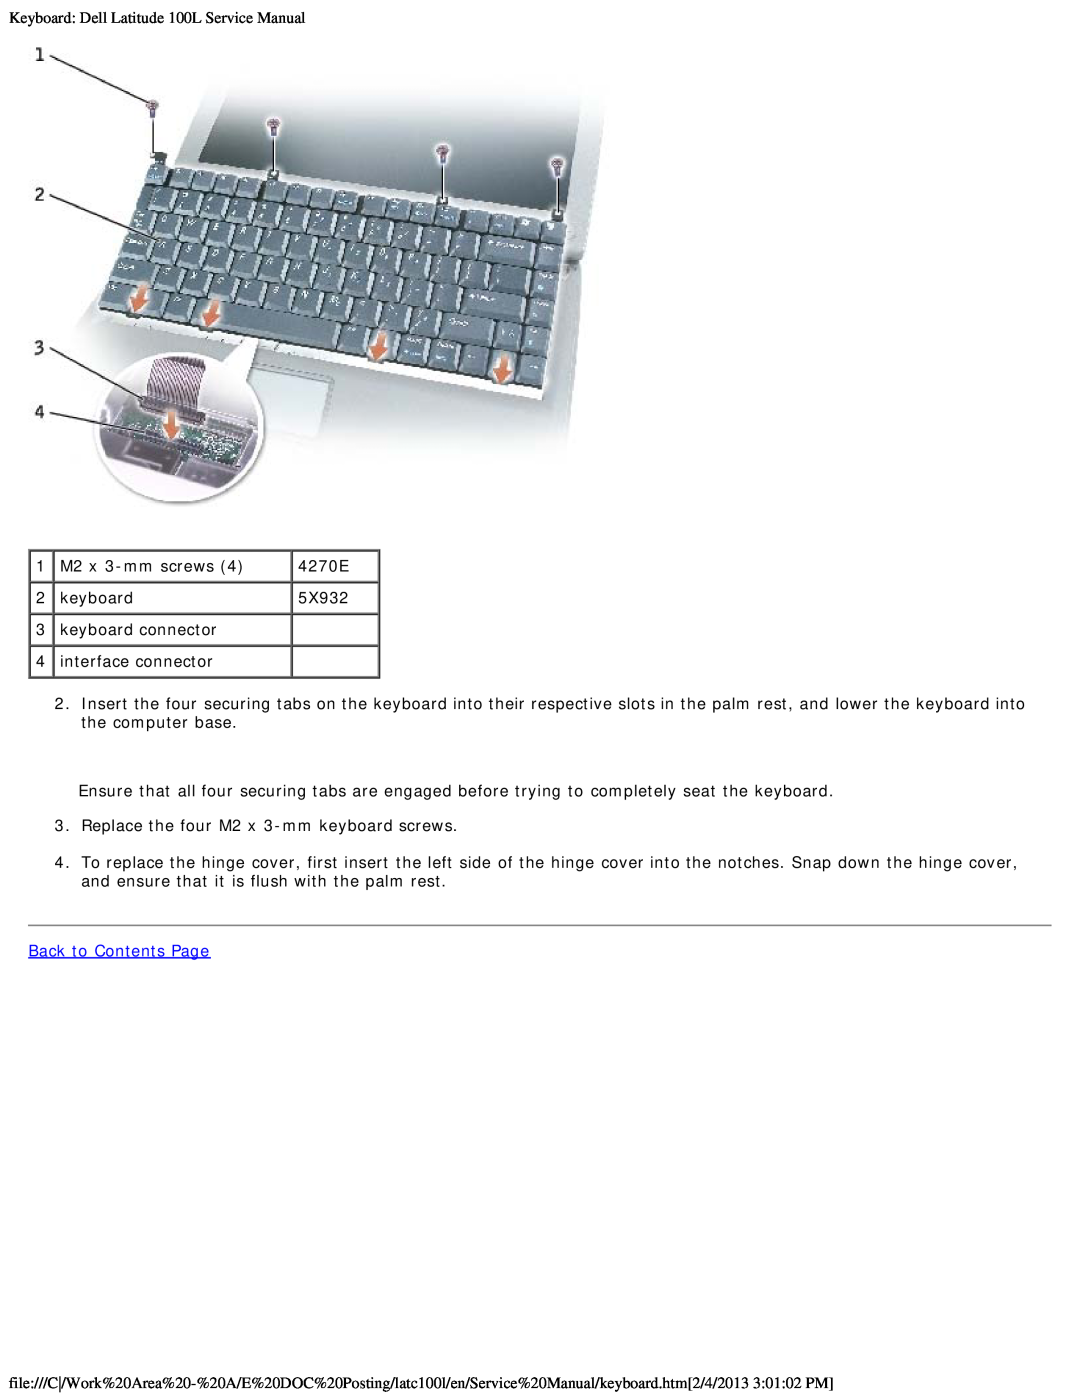 Dell service manual Keyboard Dell Latitude 100L Service Manual, Back to Contents Page 